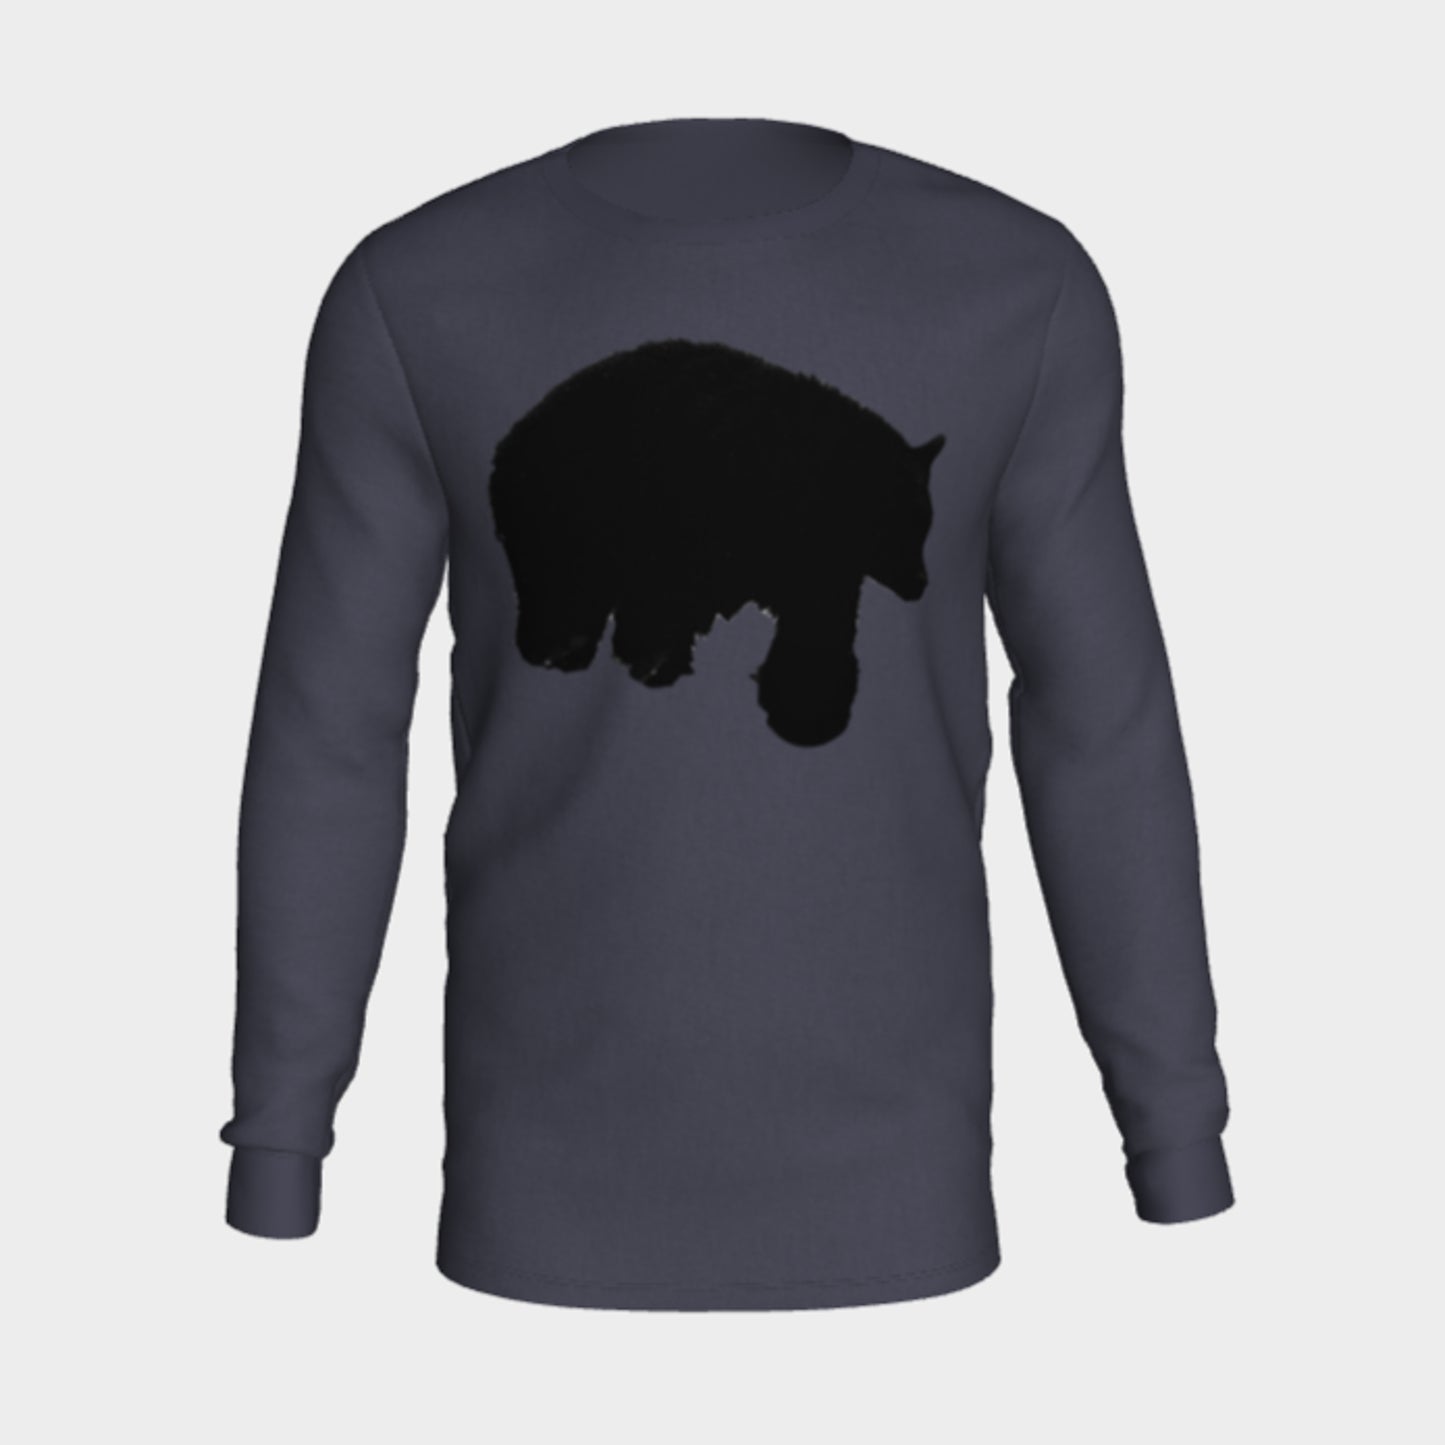 Bear Long Sleeve Unisex T-Shirt Van Isle Goddess 100% cotton crew neck long sleeve super comfy tee is a must-have basic for any wardrobe.  Whether you’re going to a gig, a sports game, a rally, or just walking down the street, this lightweight, 100% cotton crew neck is perfect!